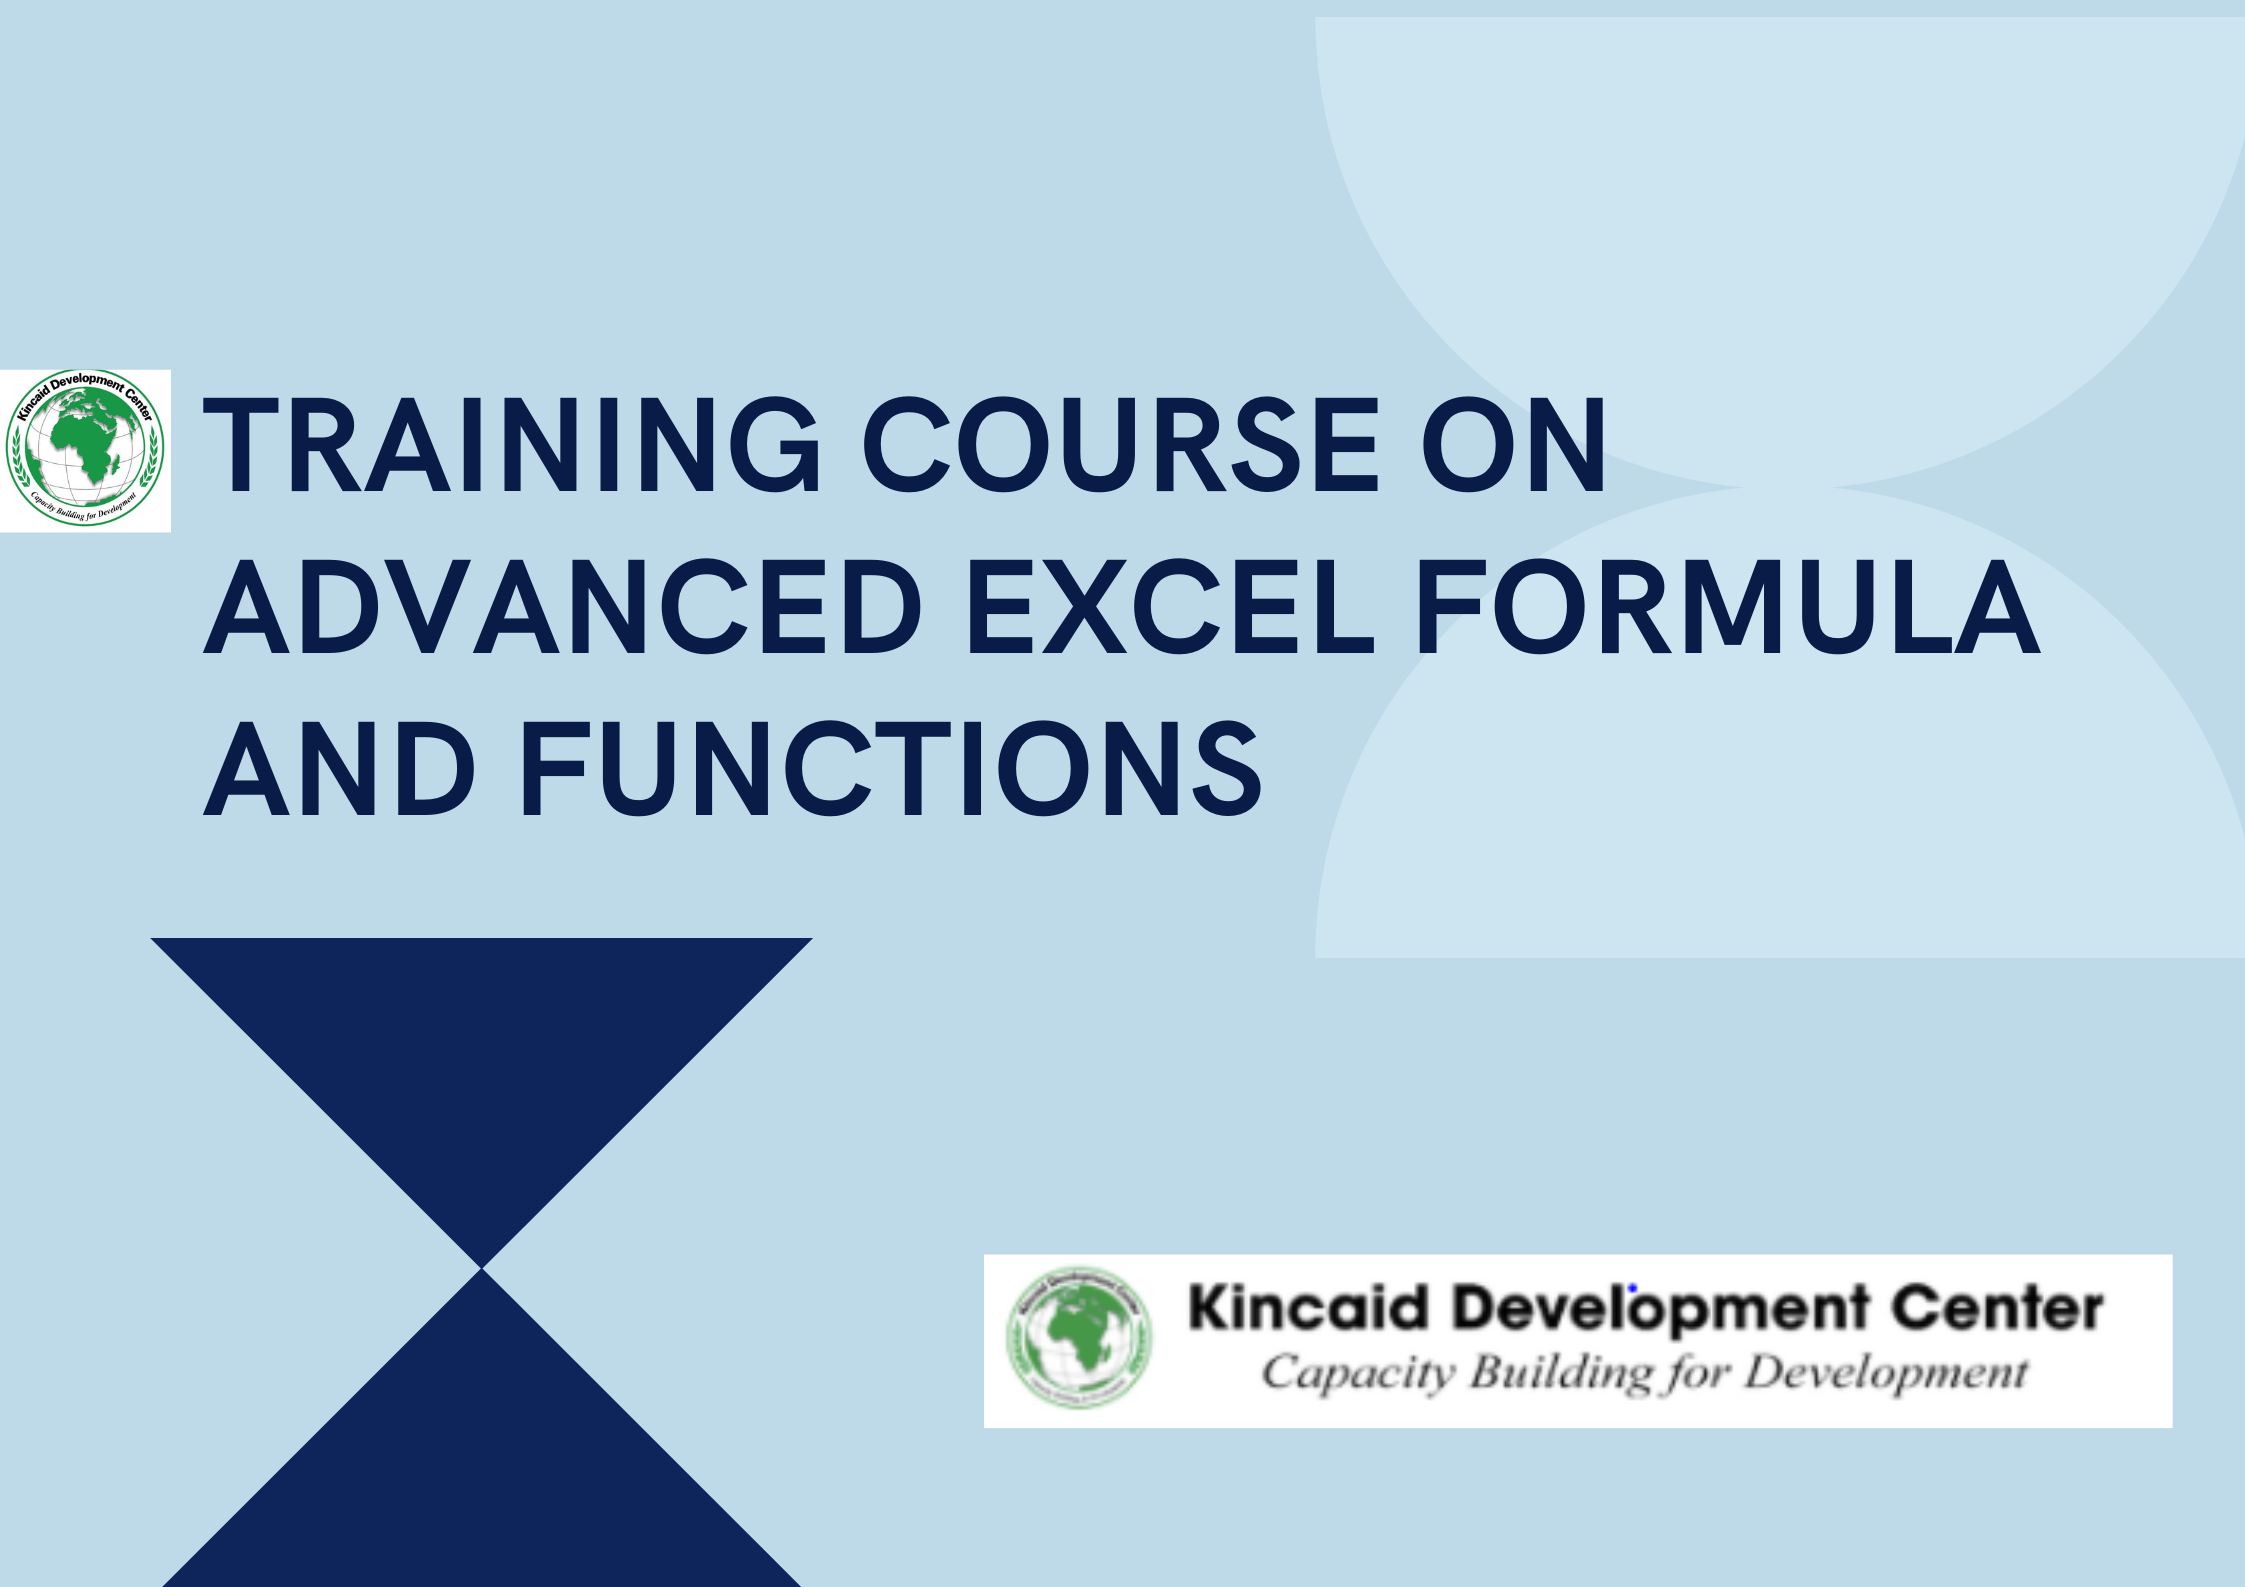 TRAINING COURSE ON ADVANCED EXCEL FORMULA AND FUNCTIONS, Nairobi, Kenya